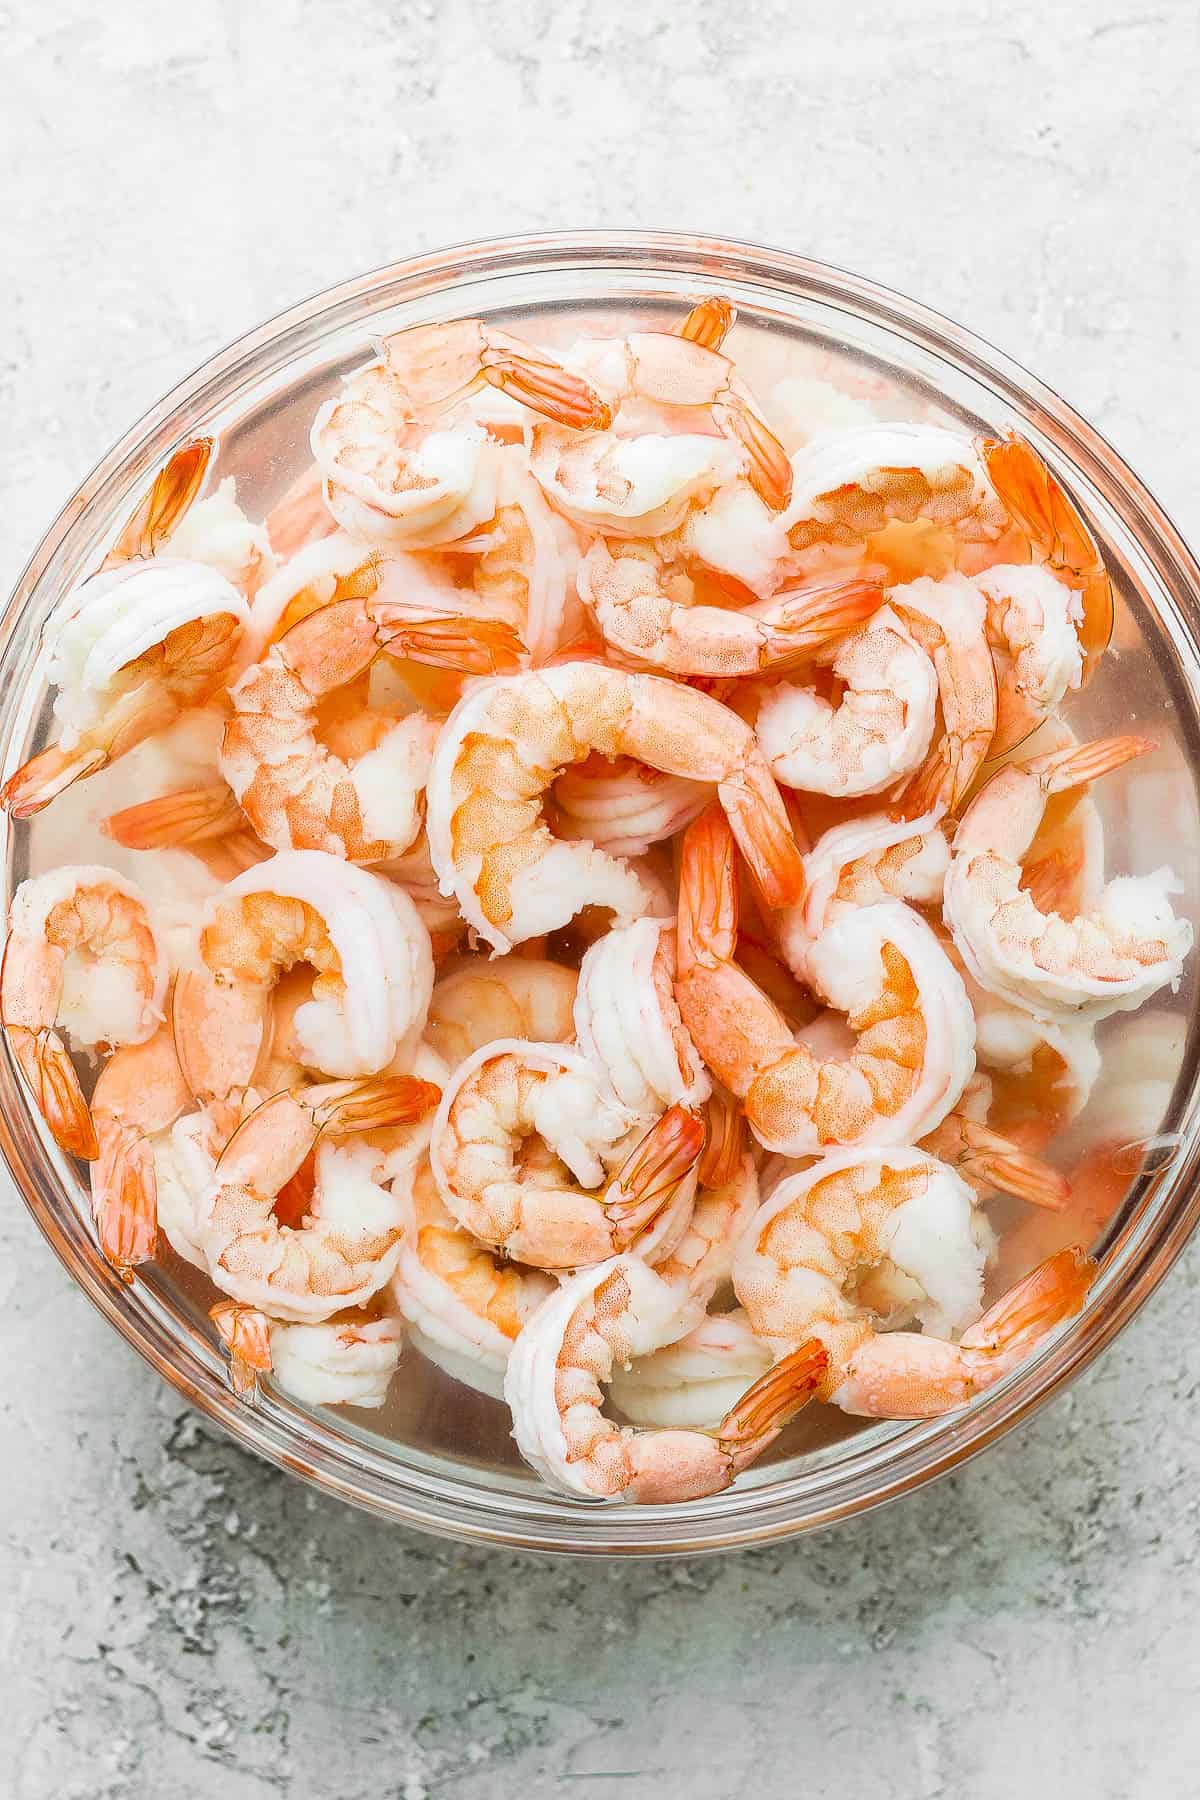 Fully cooked shrimp in a bowl of water and ice.